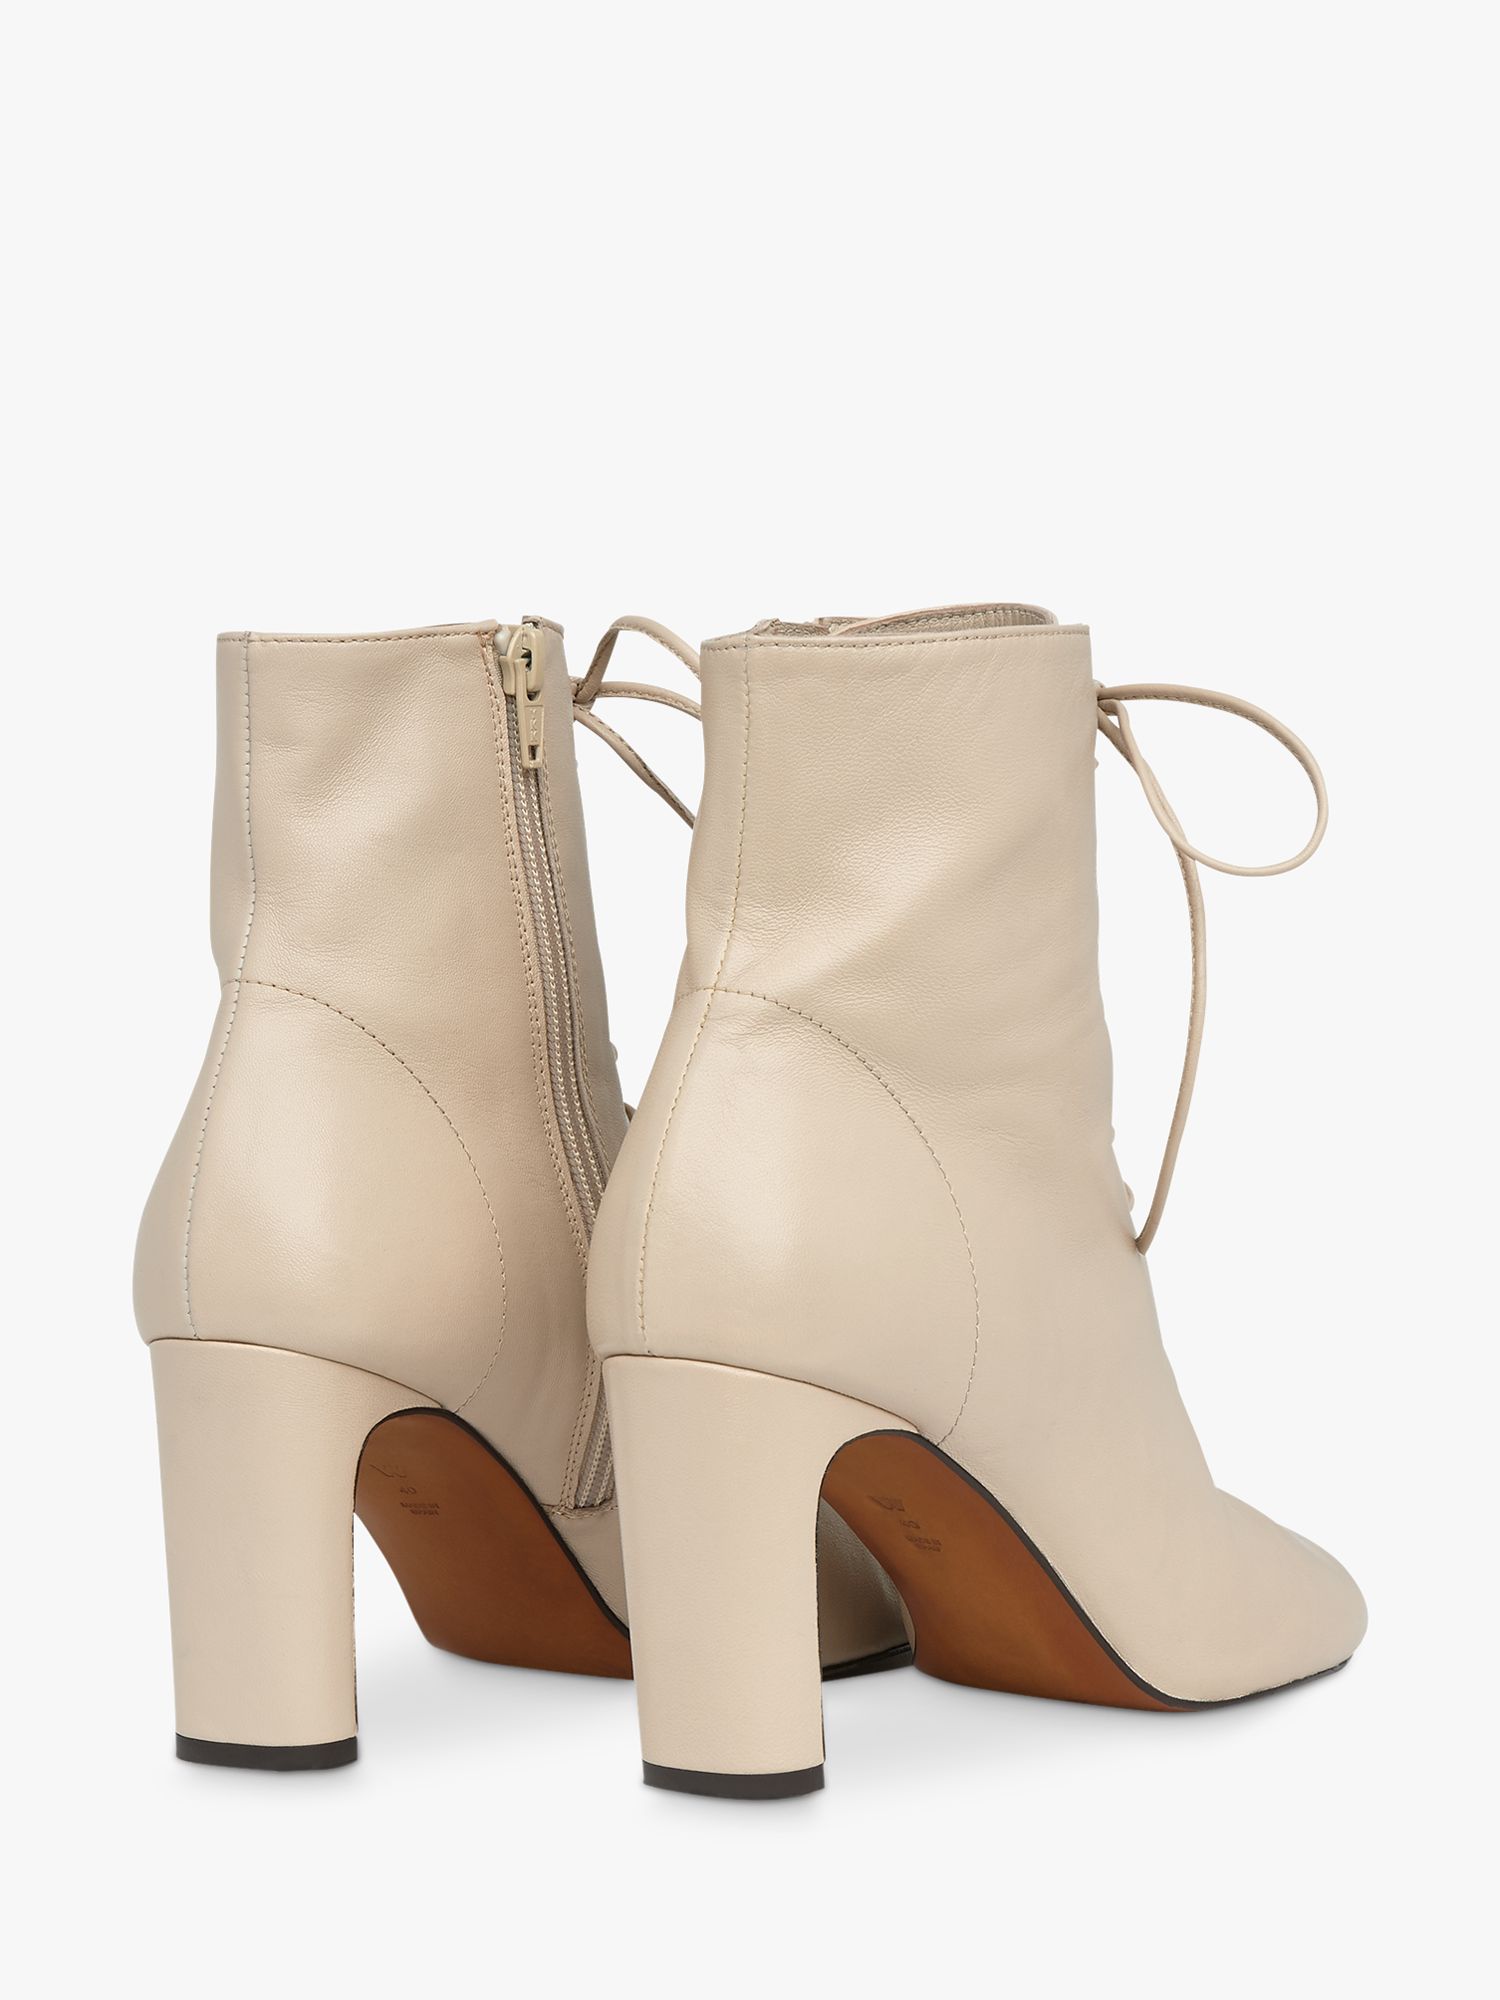 Buy Whistles Dahlia Leather Lace Up Ankle Boots Online at johnlewis.com